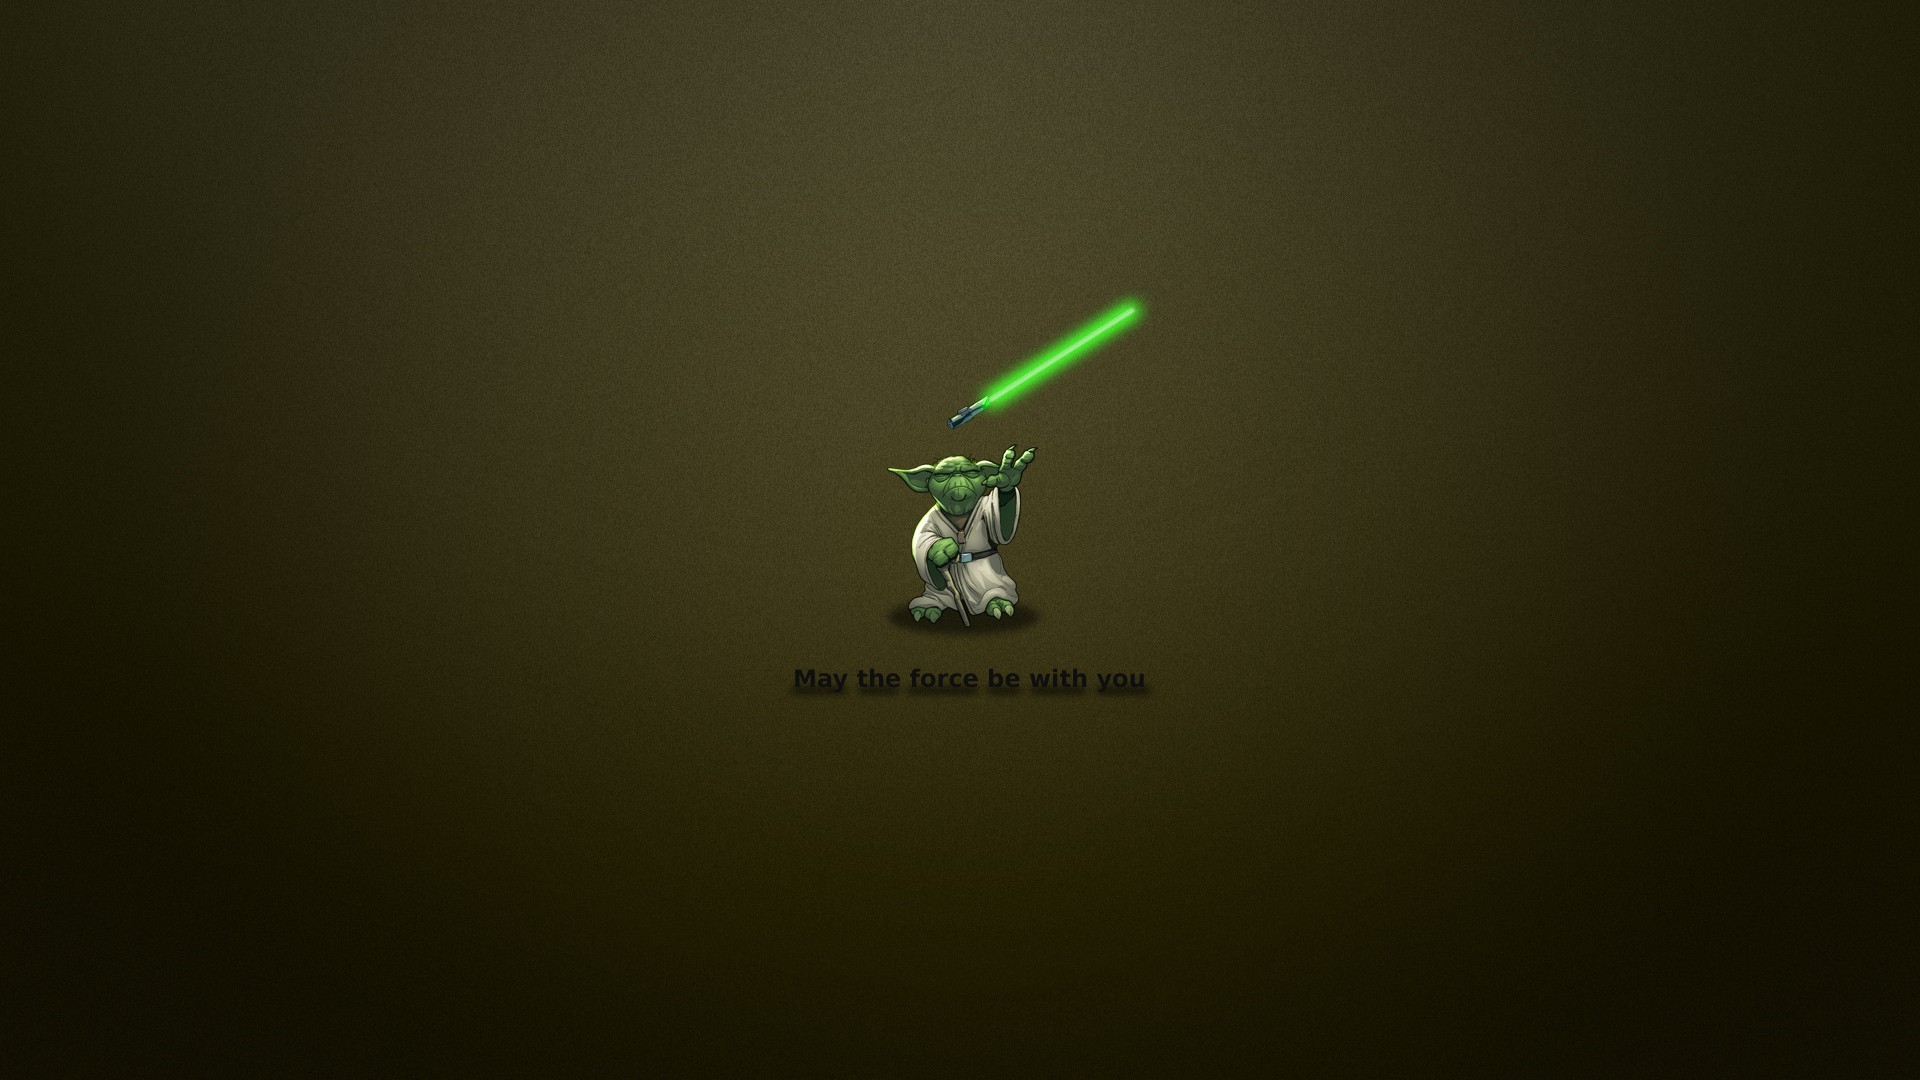 Free Download May The Force Be With You Fun Green Star Wars